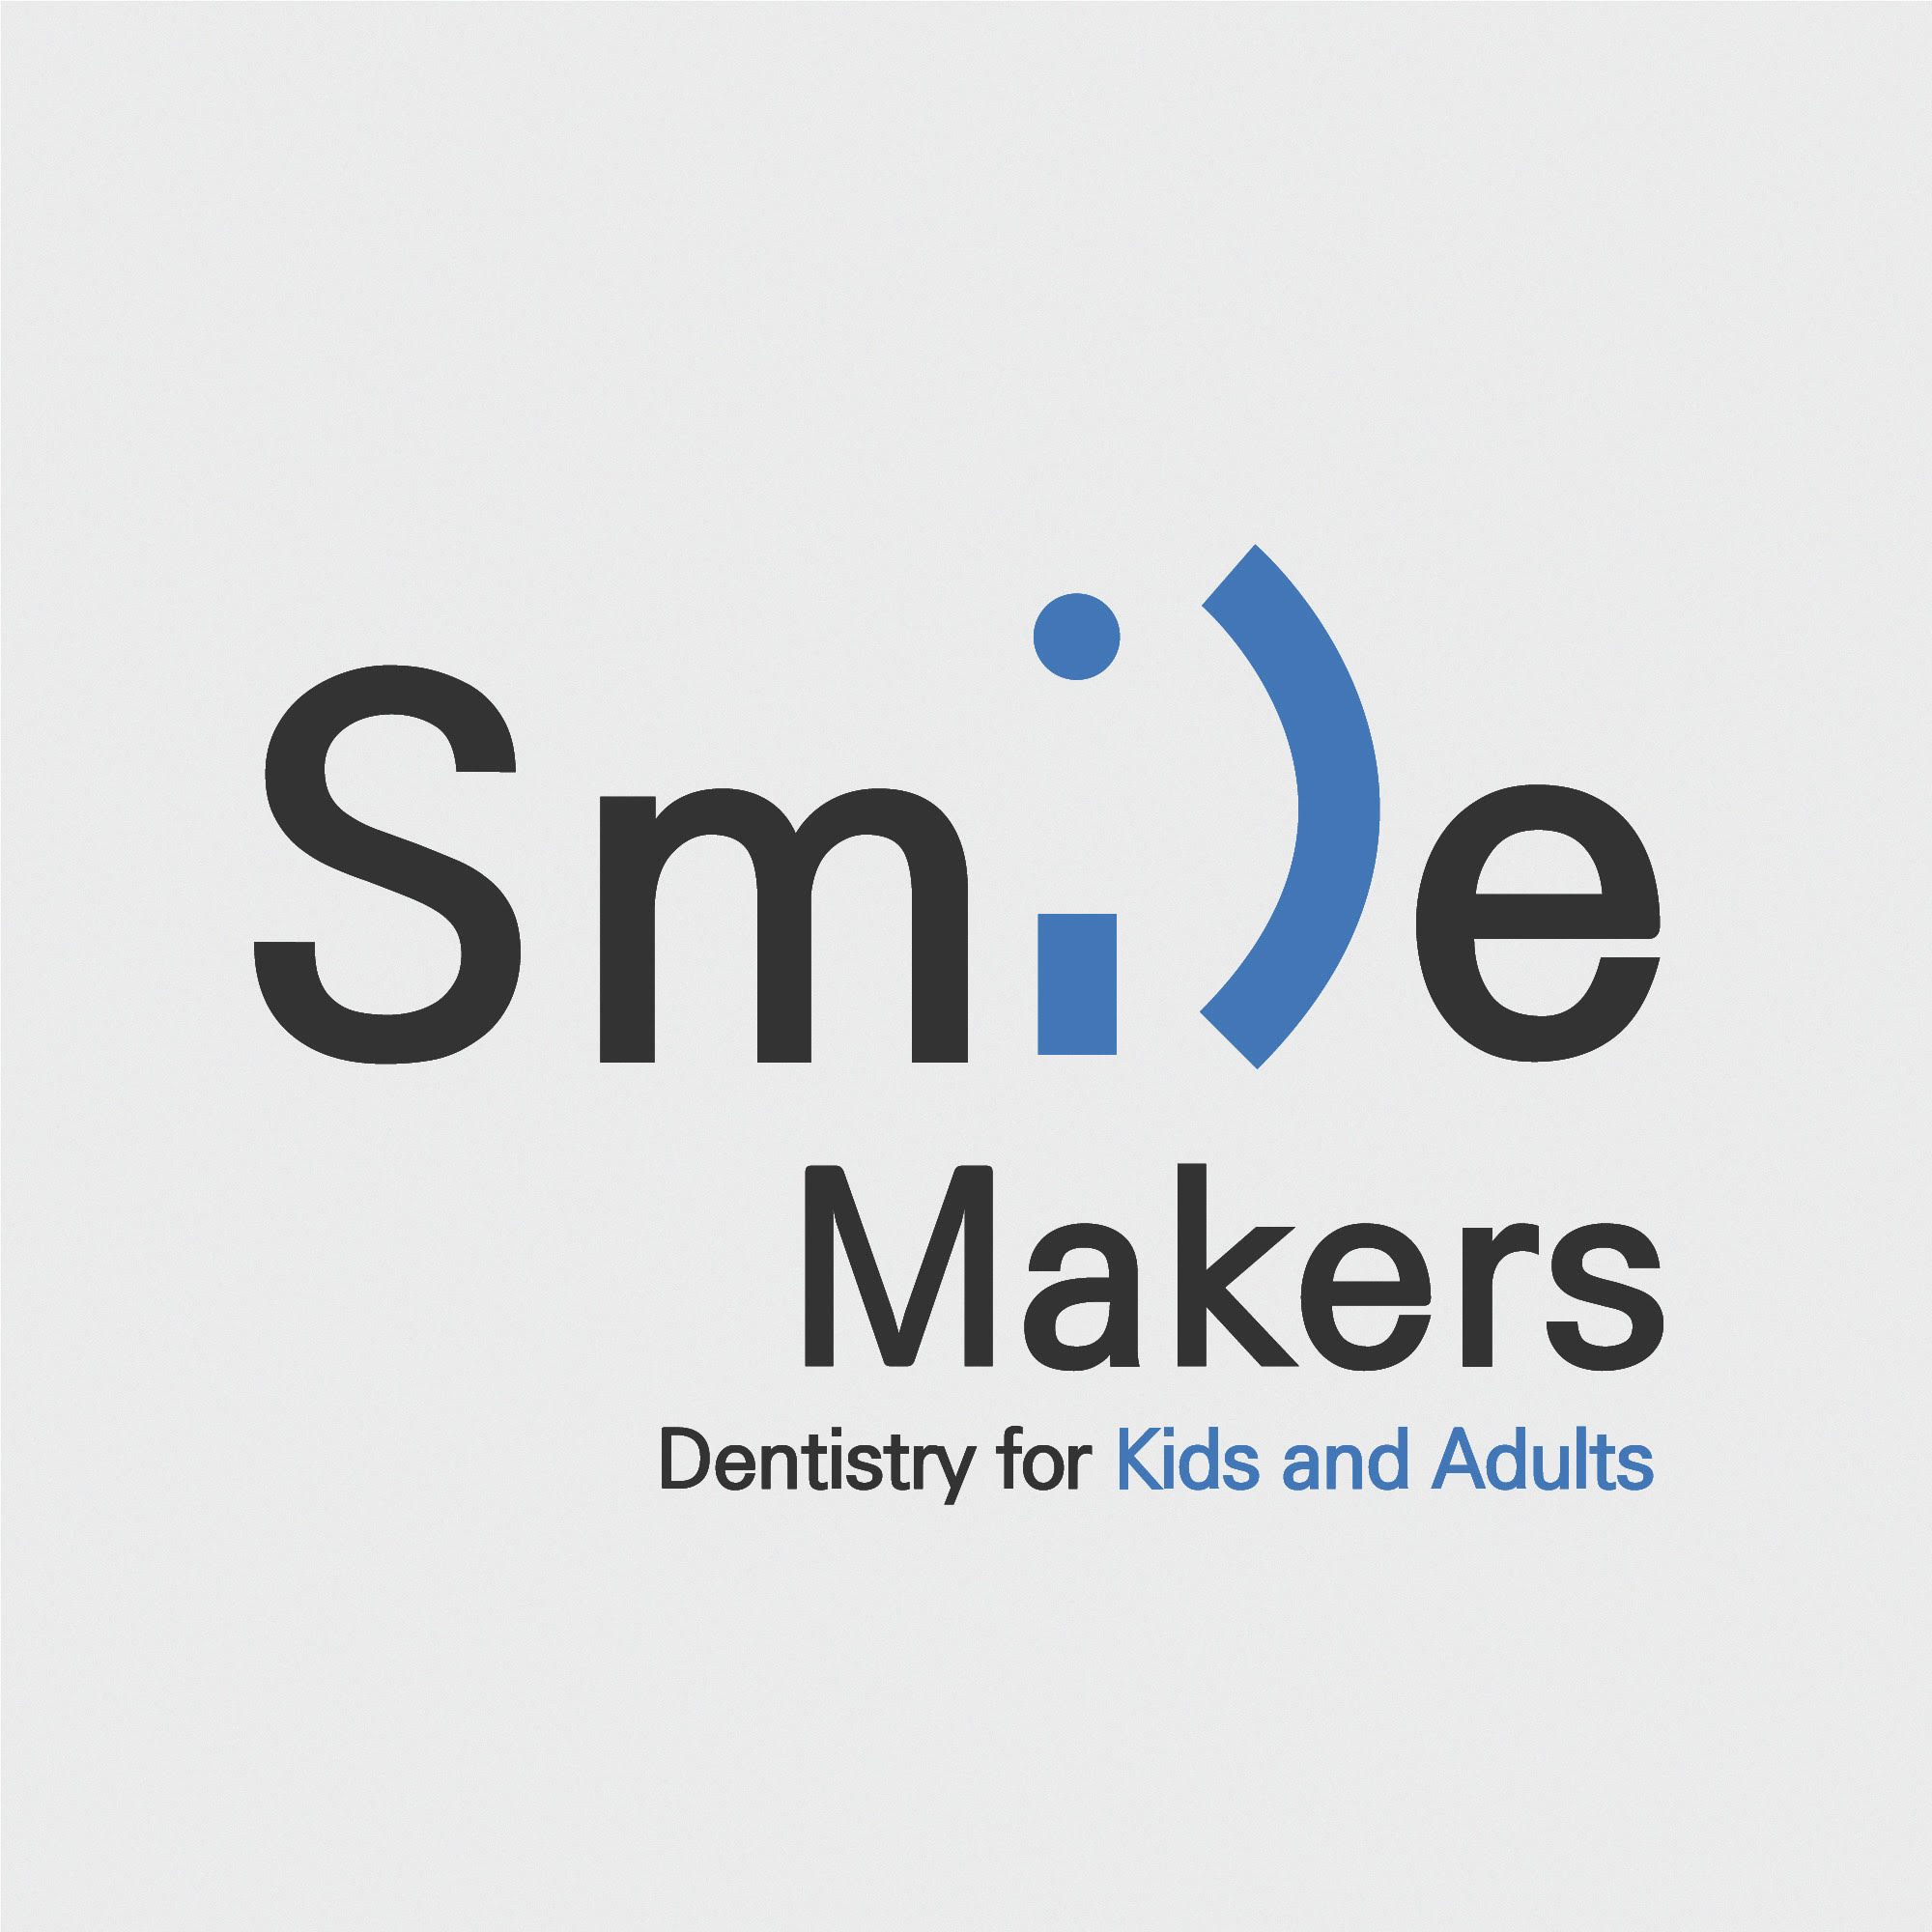 Smile Makers Dentistry